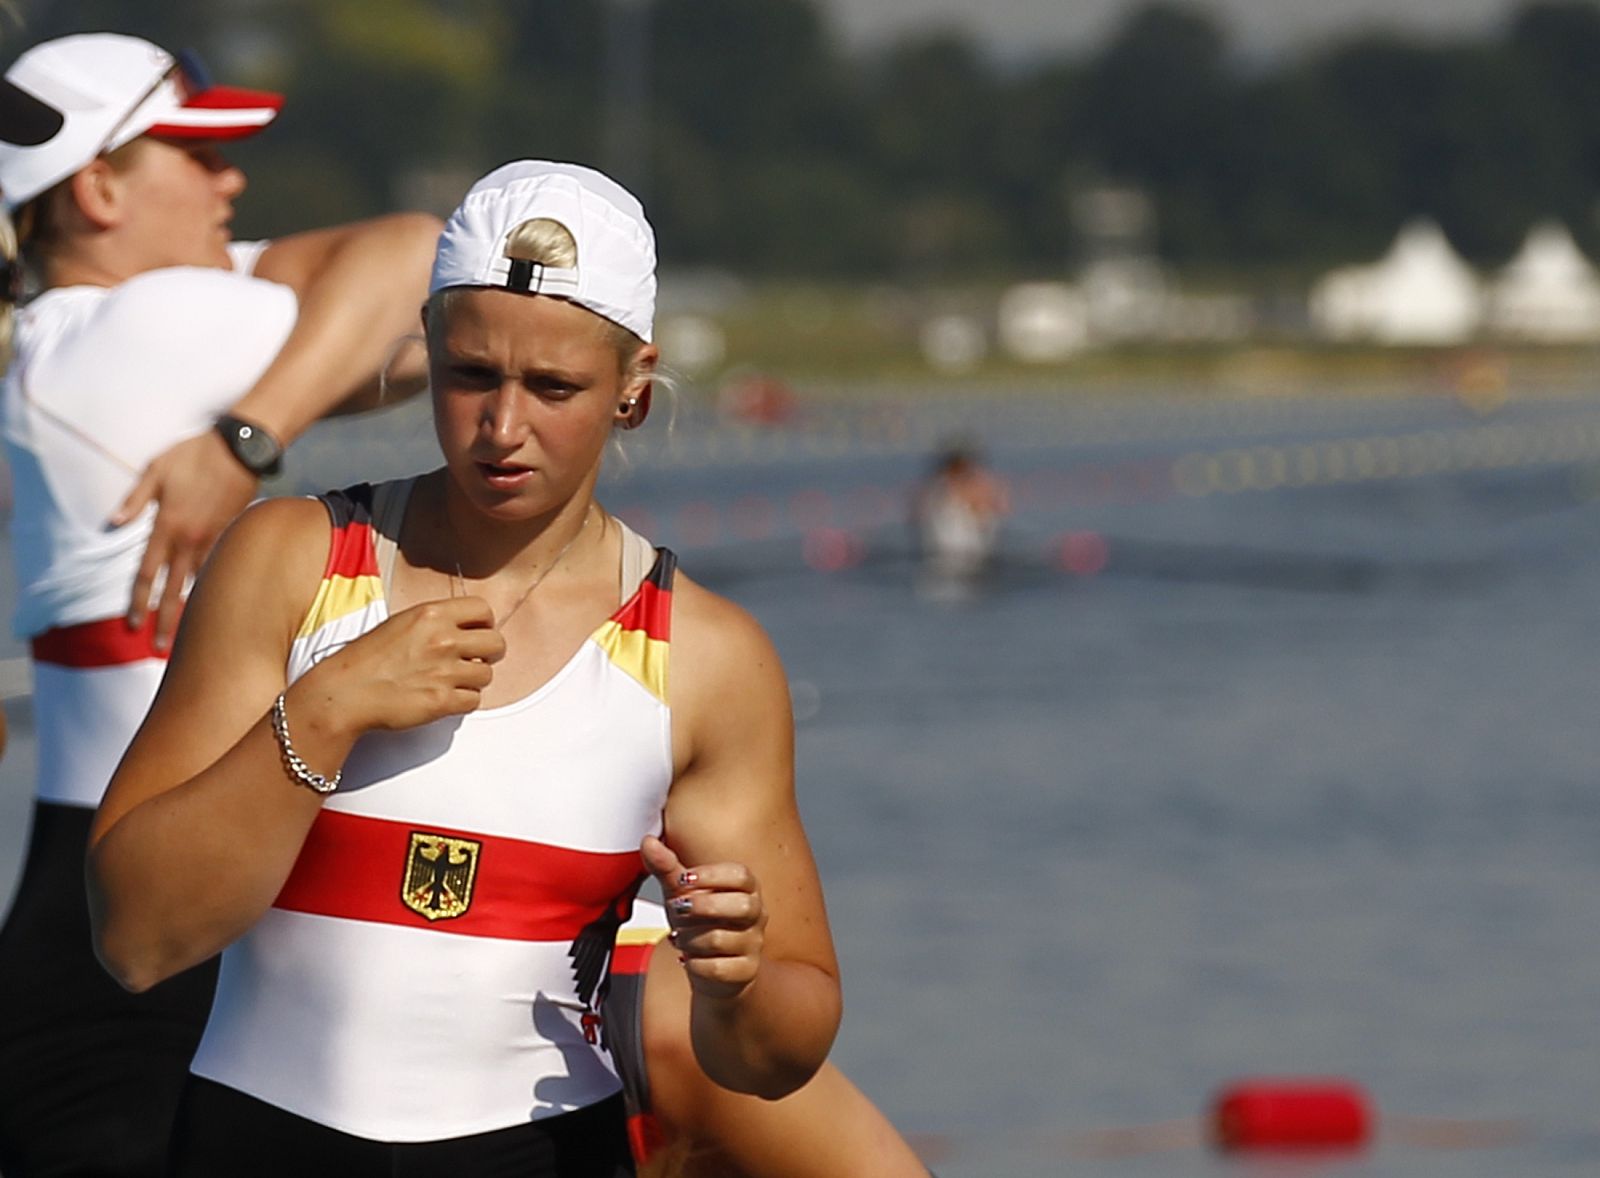 Germany's Nadja Drygalla prepares for a training session at Eton Dorney before the London 2012 Olympic Games